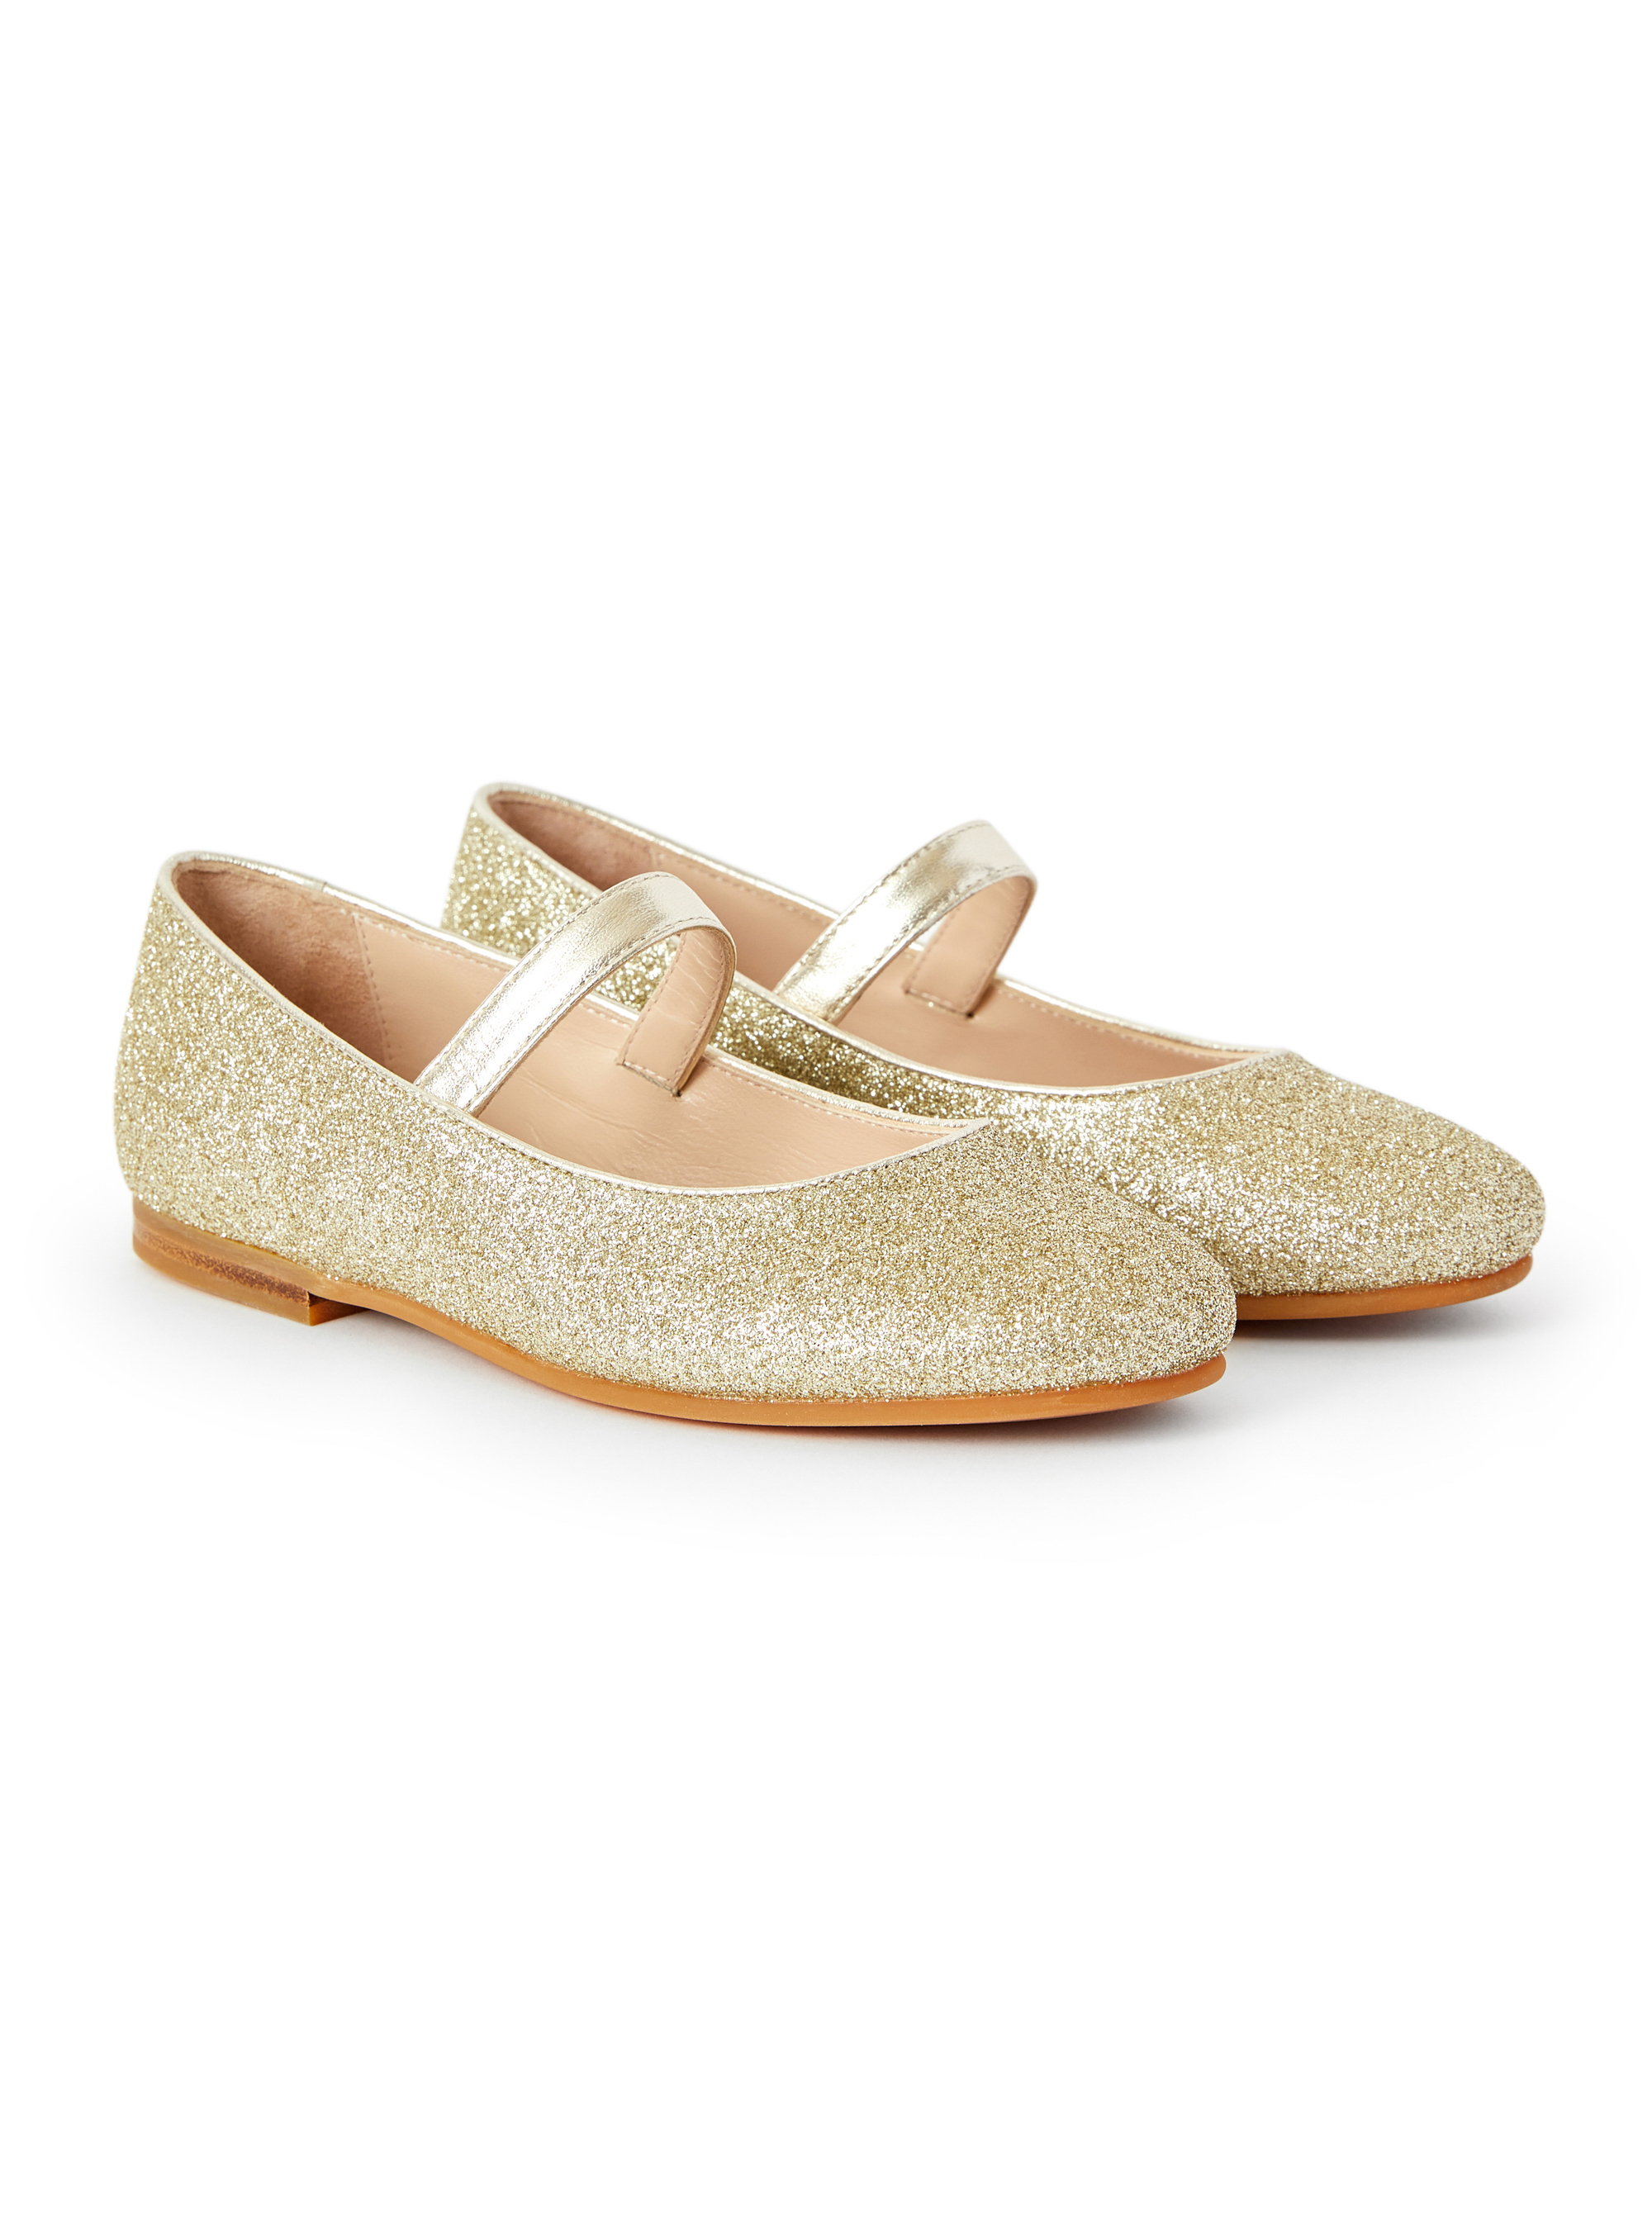 Flat shoes with gold glitter - Shoes - Il Gufo